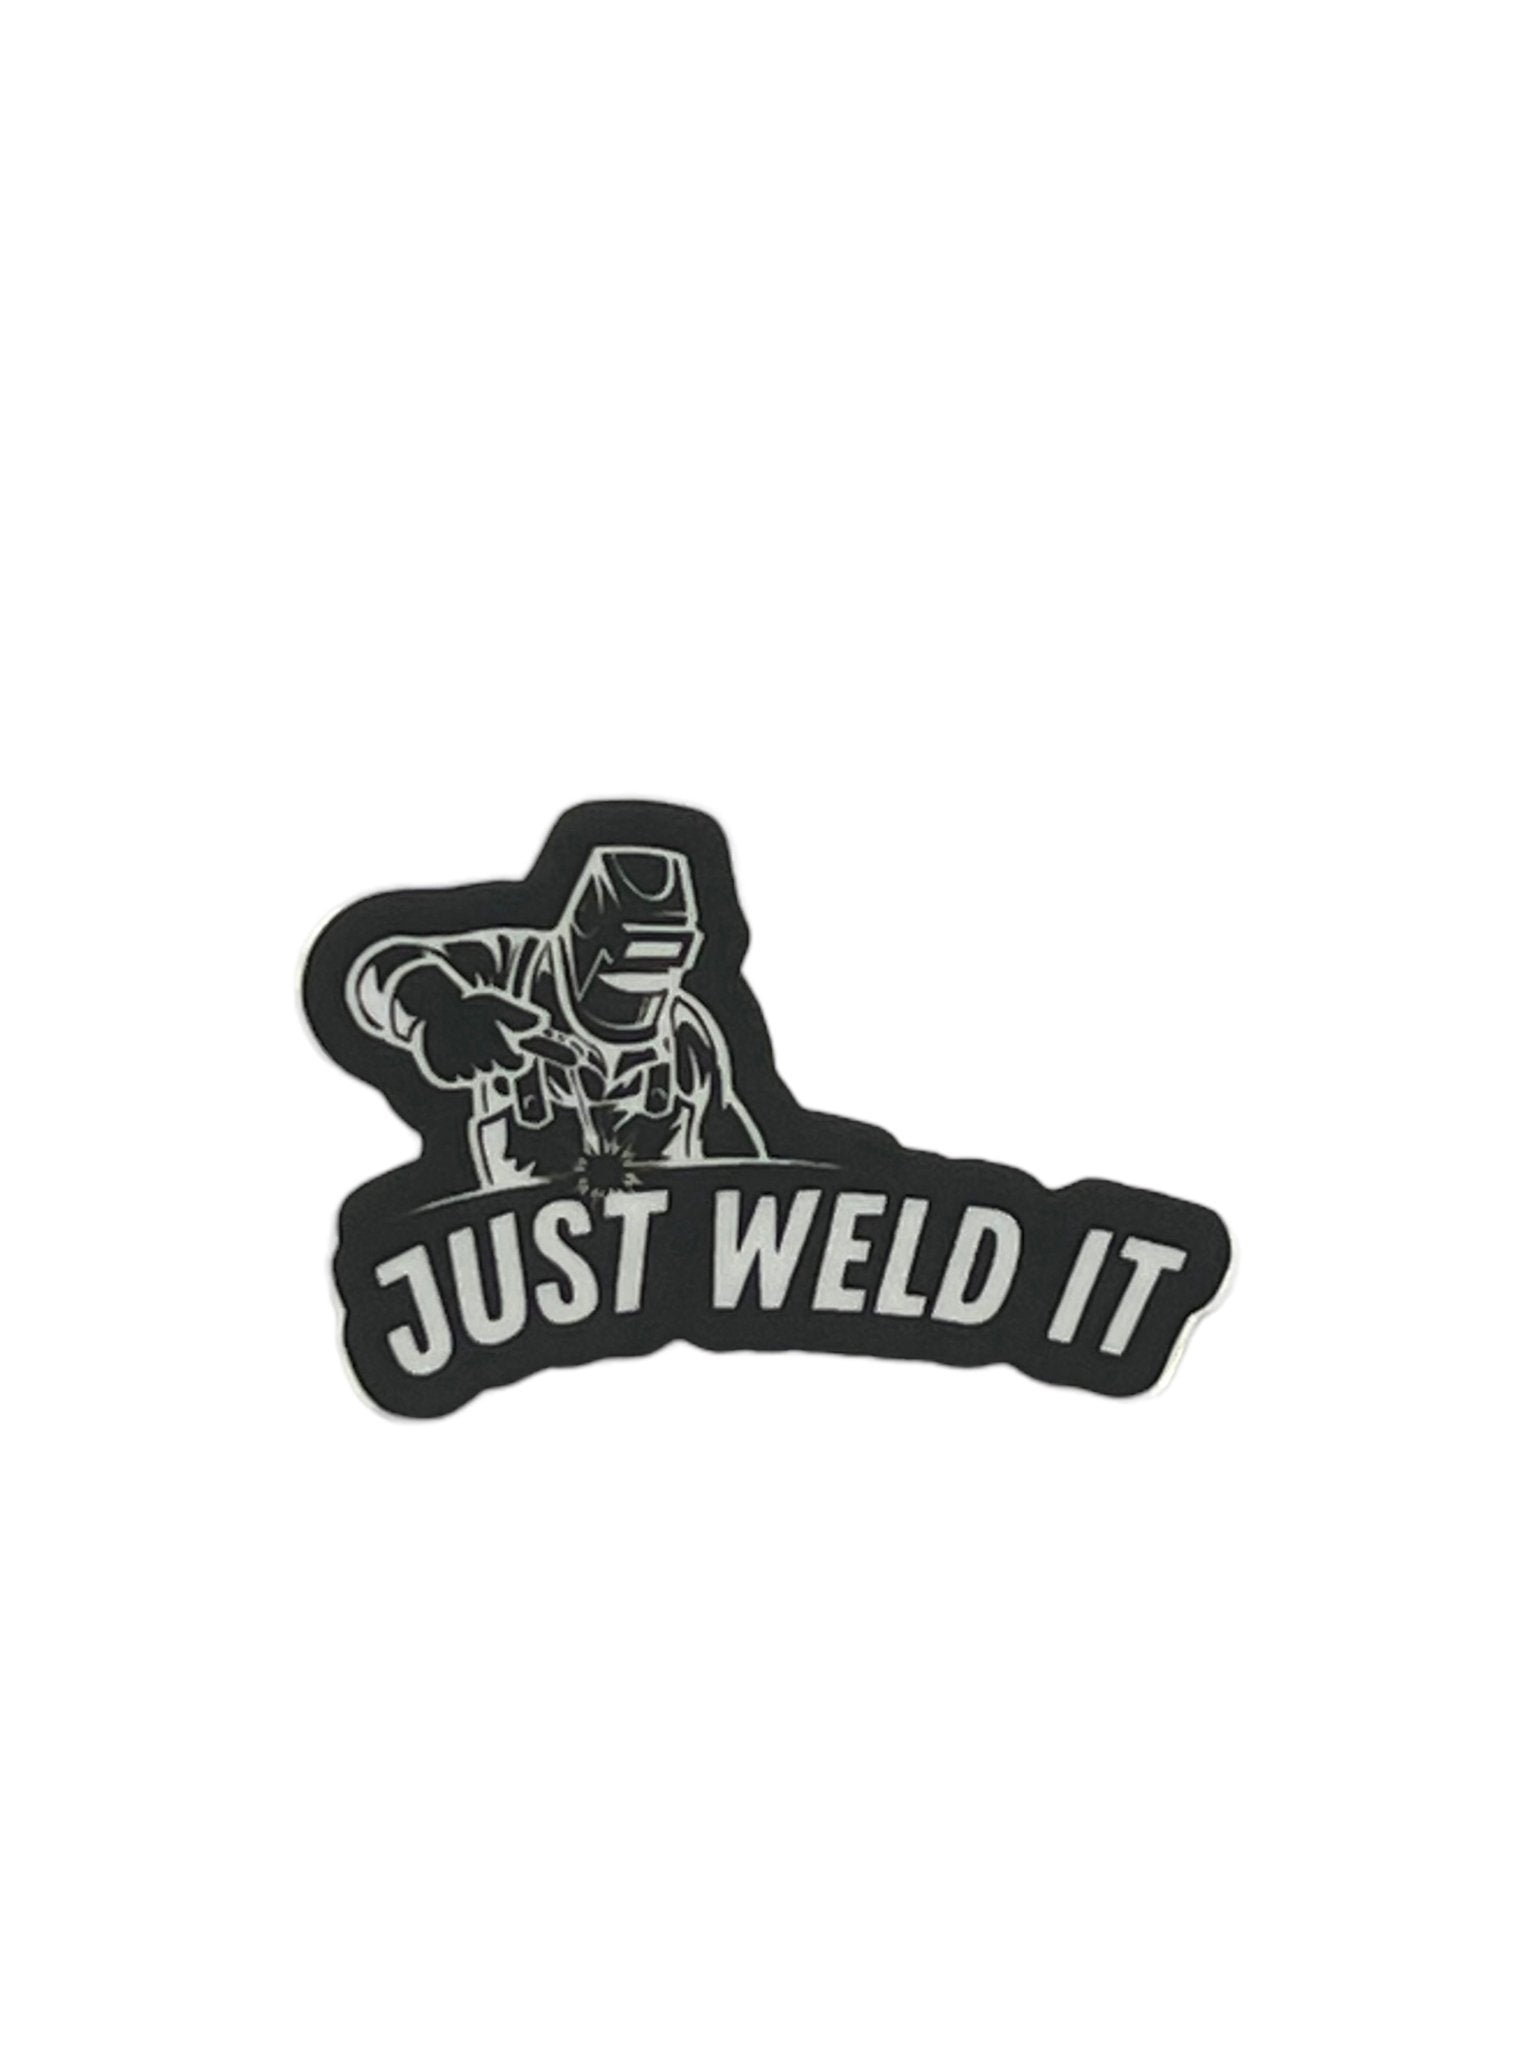 Just Weld It Sticker - TriArc Welding And Supply